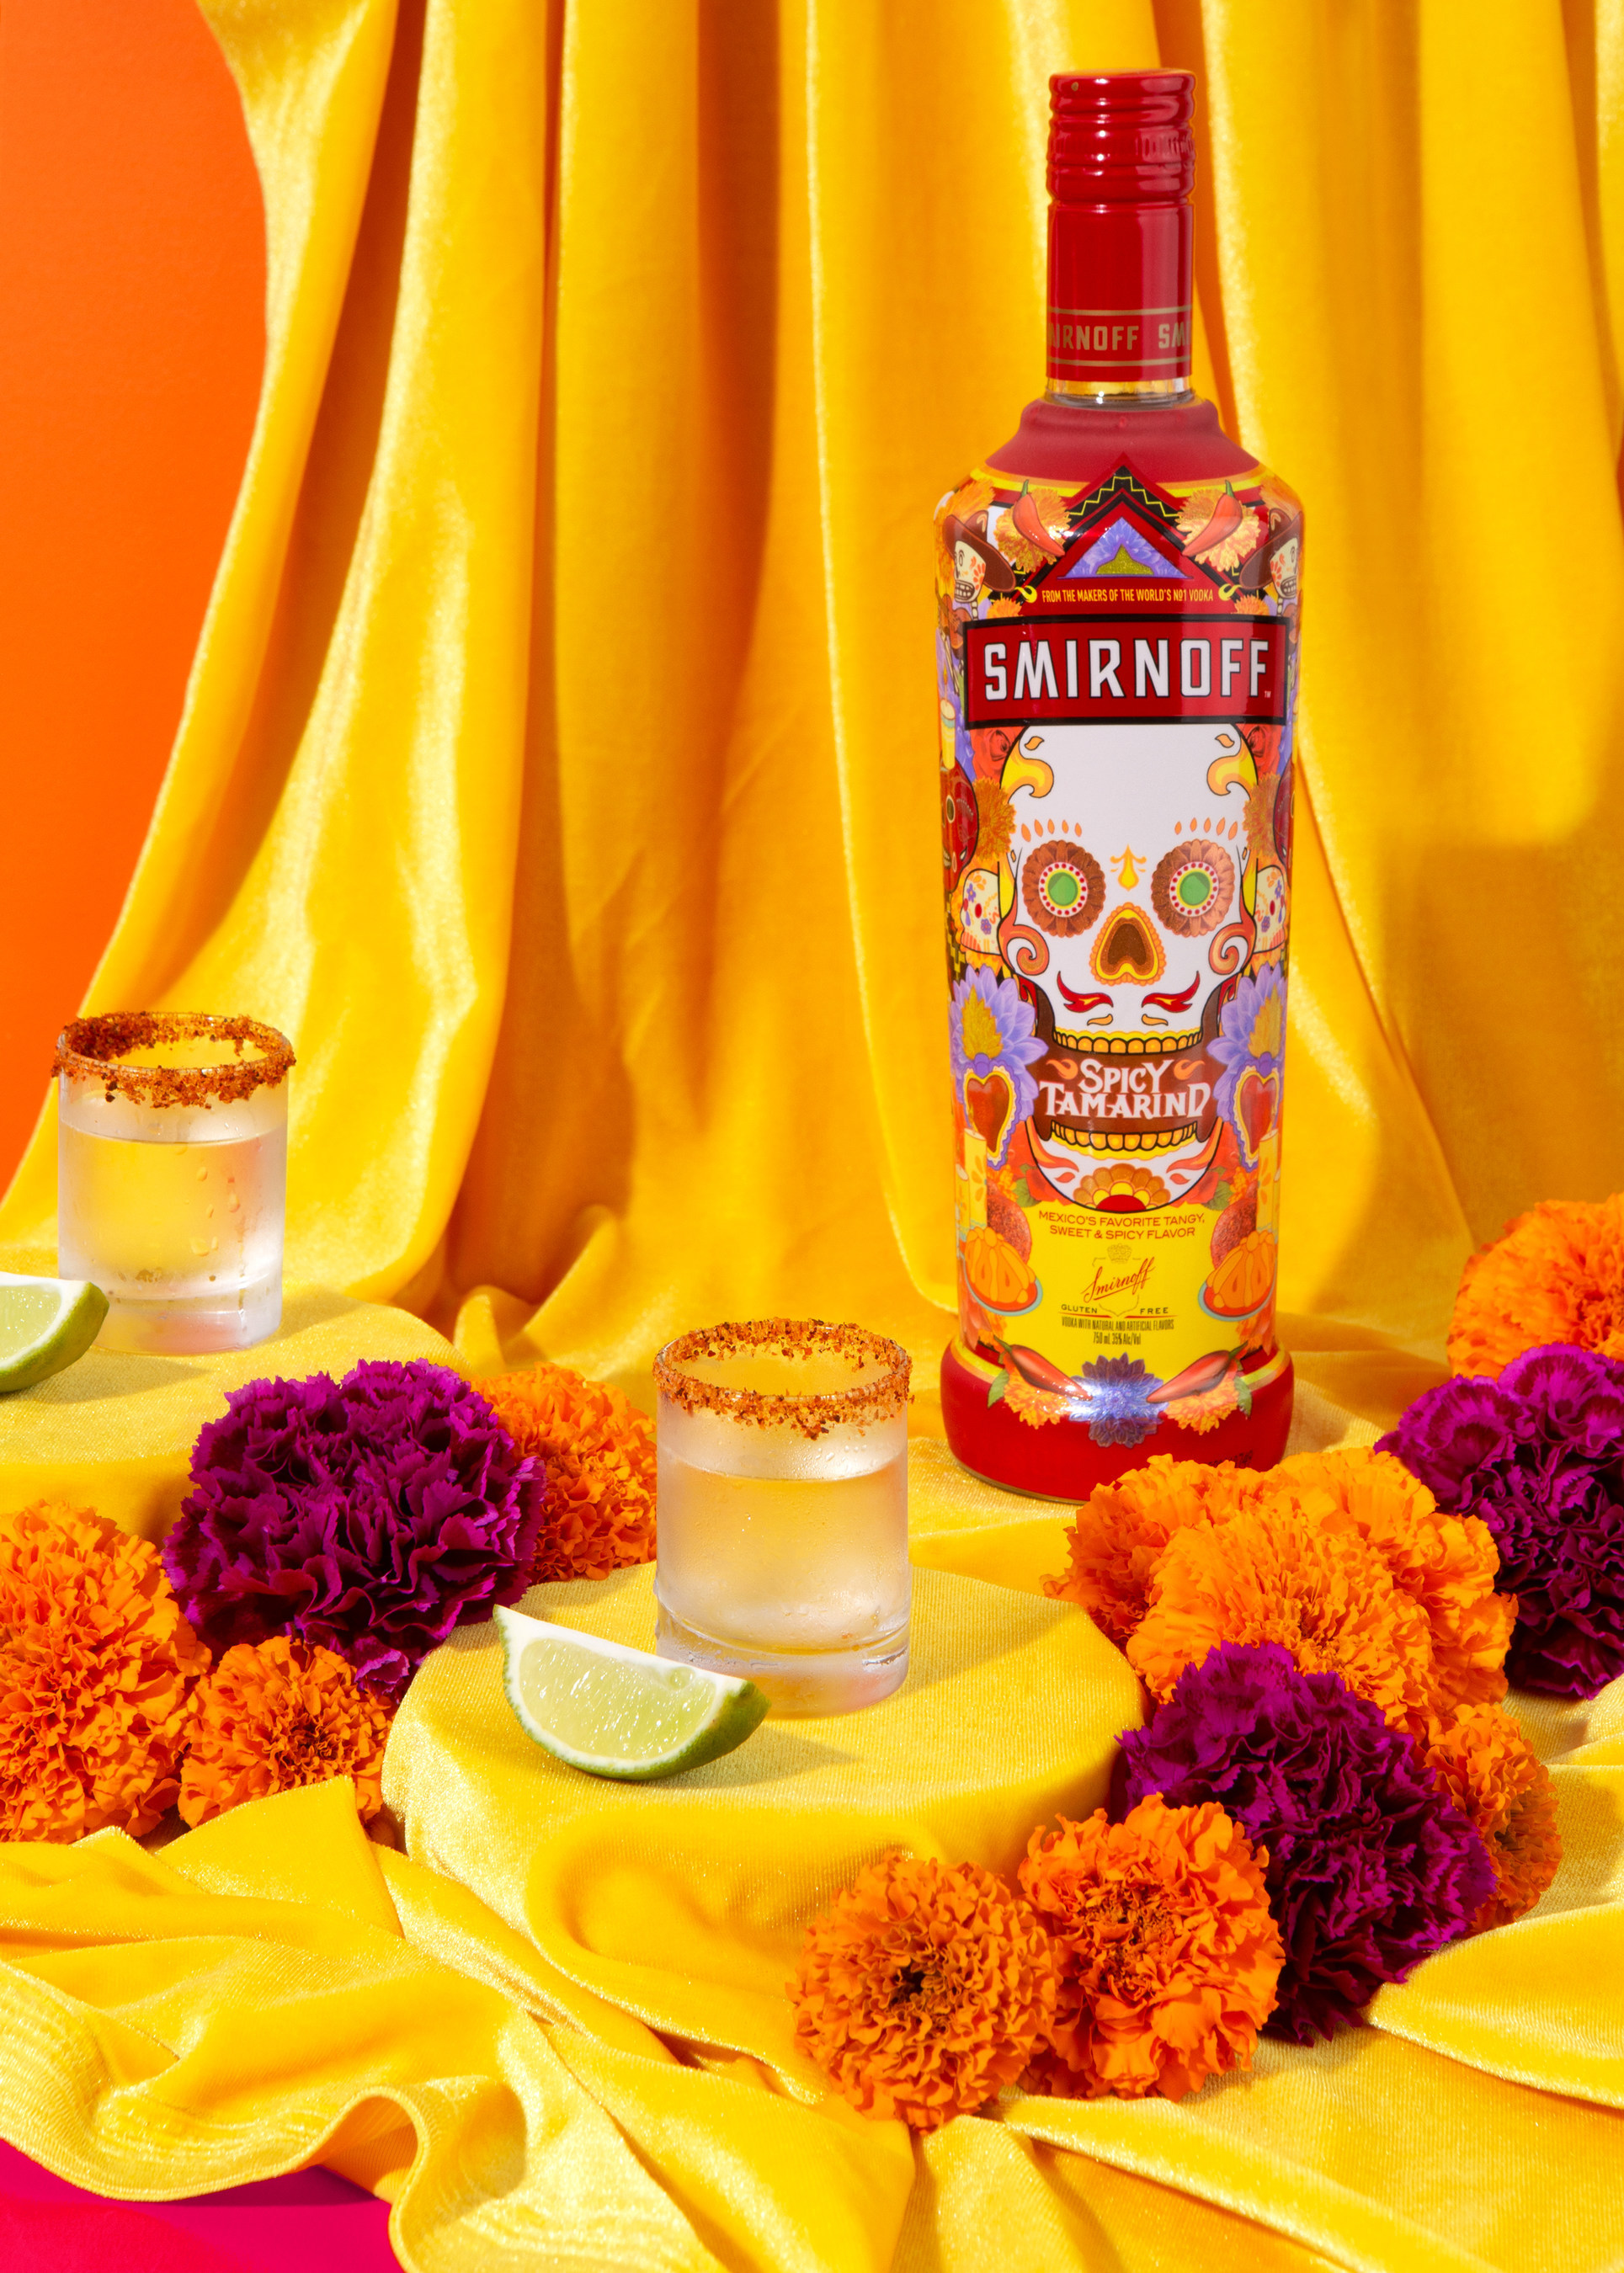 Proudly Sweet Shamelessly Spicy Smirnoff Is Delivering A Shot Of Authentic Flavor And Expanding Its Spicy Tamarind Offering To More Markets Across The U S